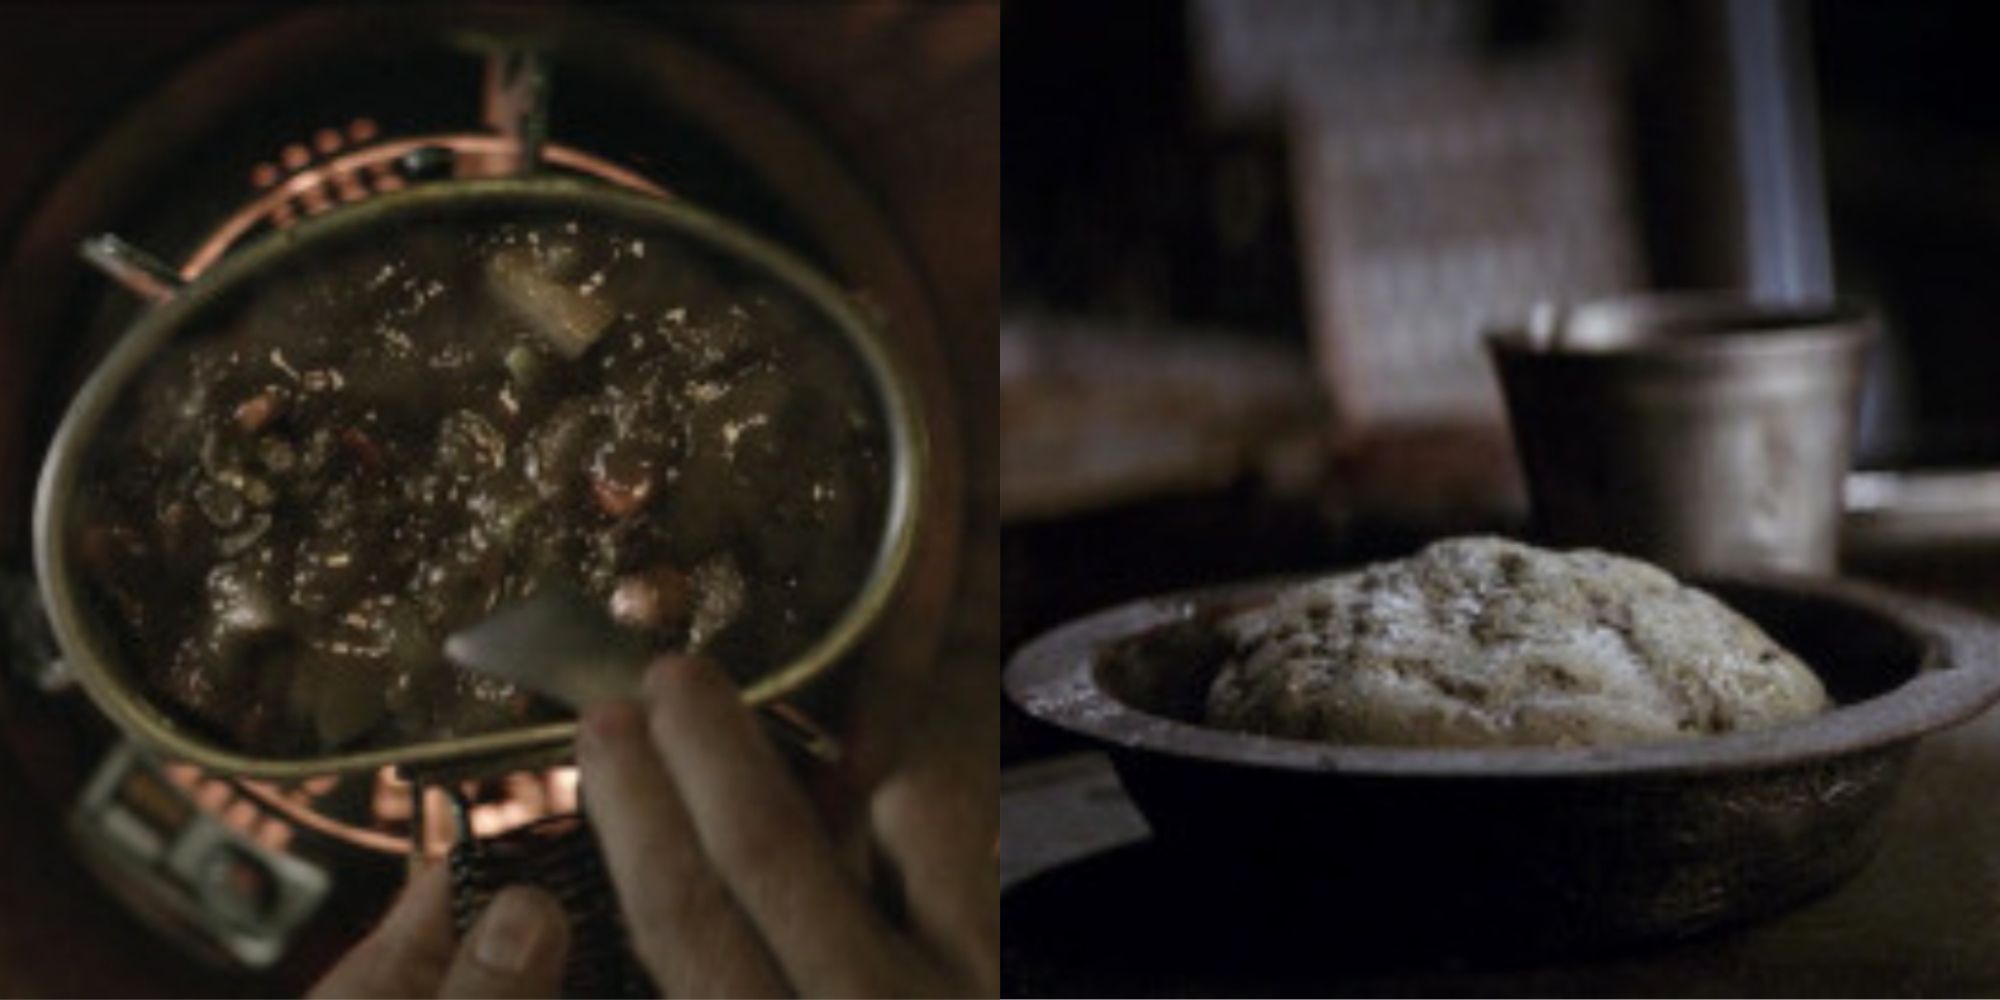 Split image of Obi-Wan Kenobi meal and Rey's meal from Star Wars: The Force Awakens